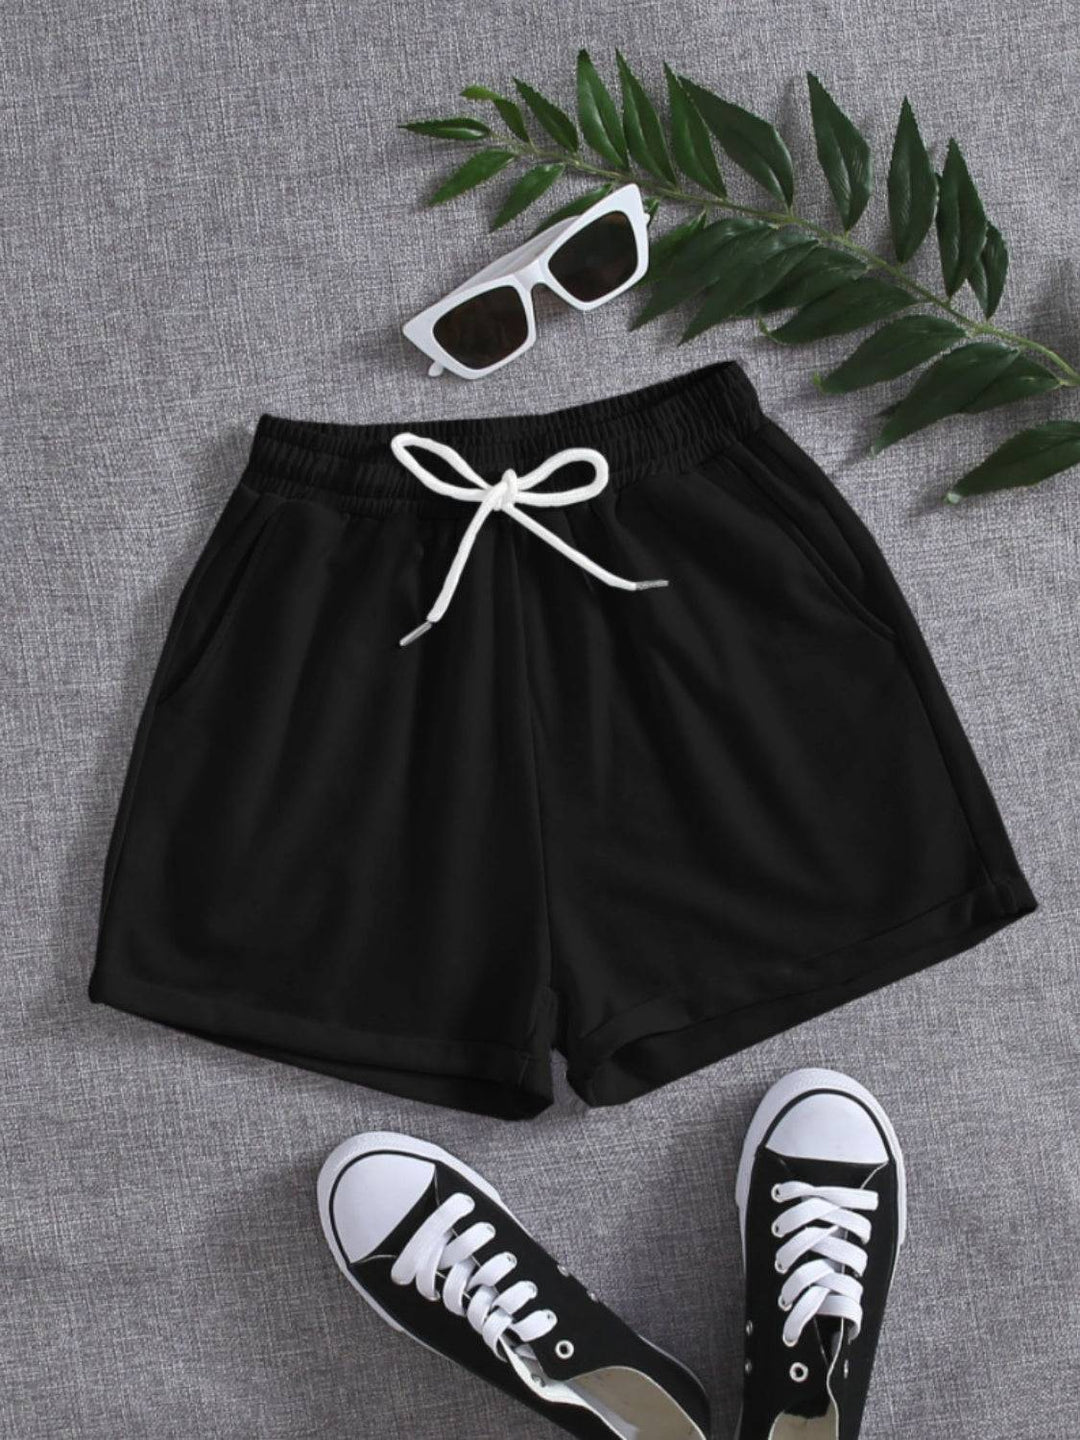 a pair of sneakers, sunglasses and a pair of black shorts